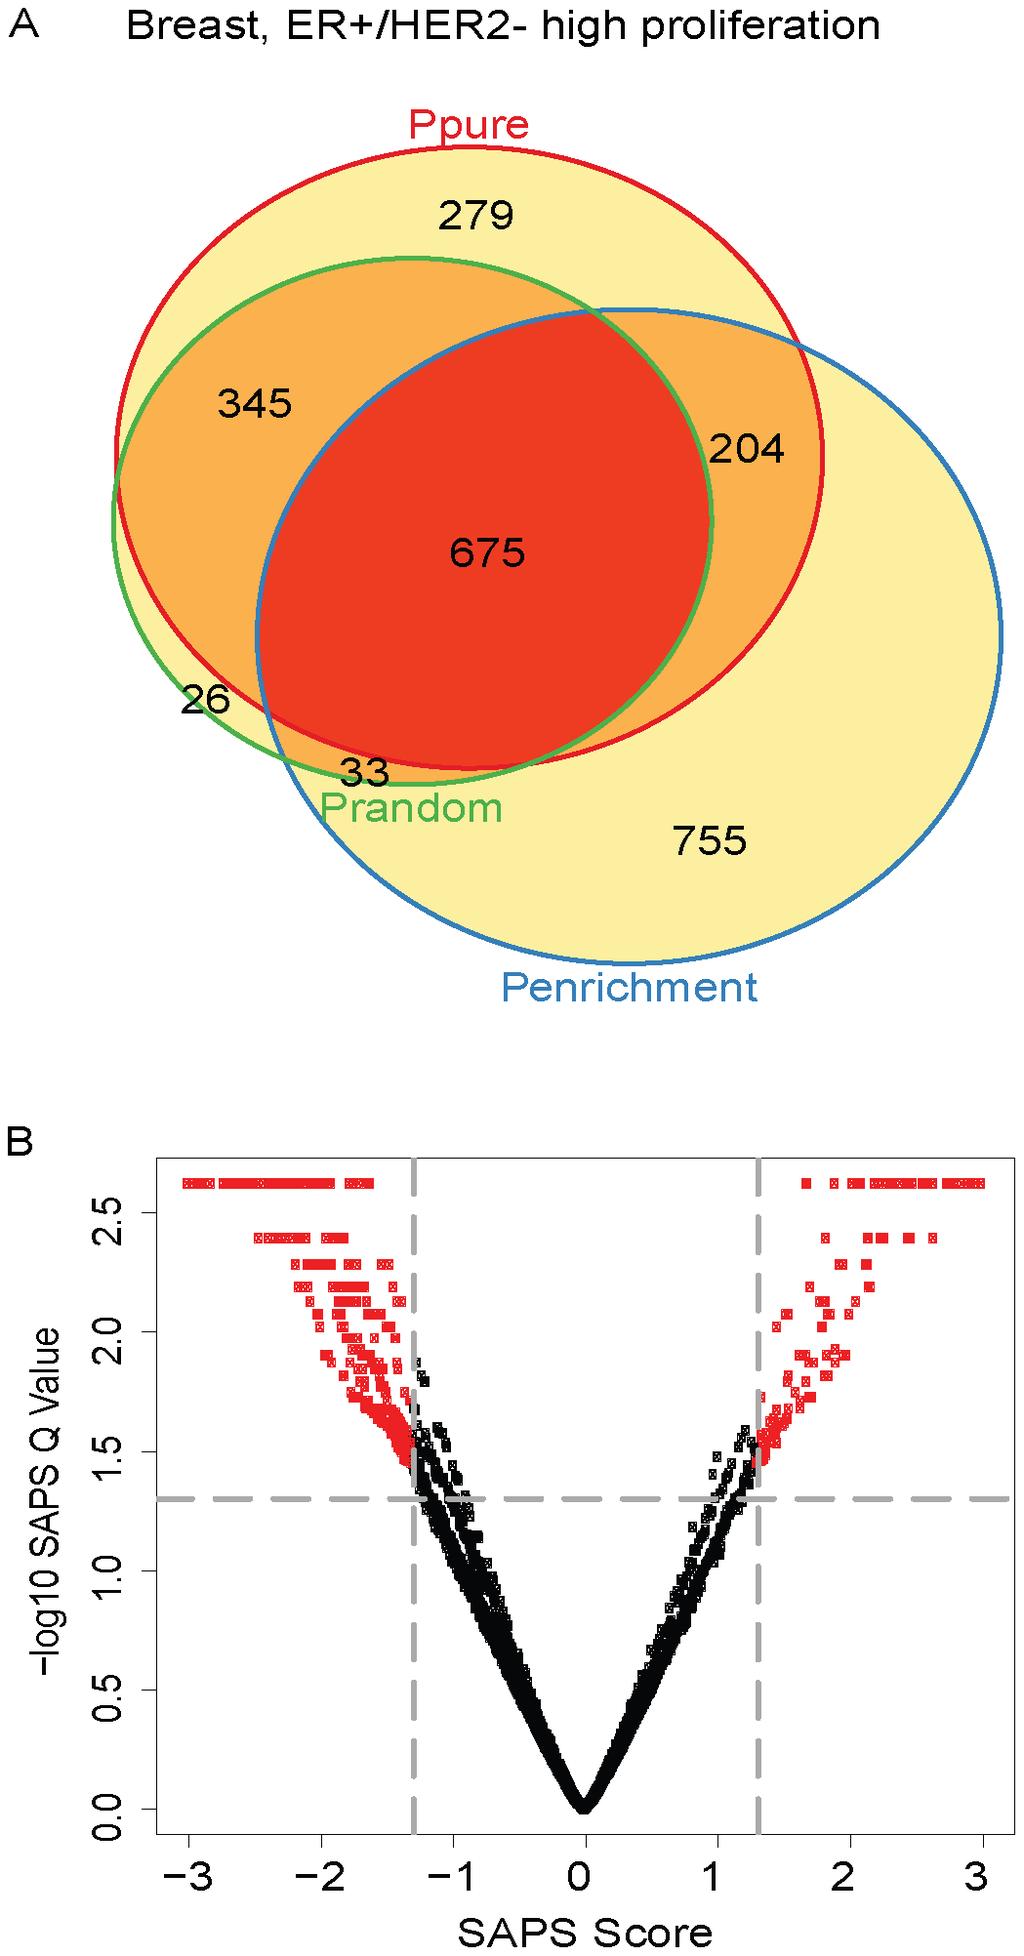 Figure 3. ER+/HER22 high proliferation Venn diagram and scatterplot. (A) The gene sets significant by at least one of the P values at the 0.05 level are displayed in a Venn diagram.